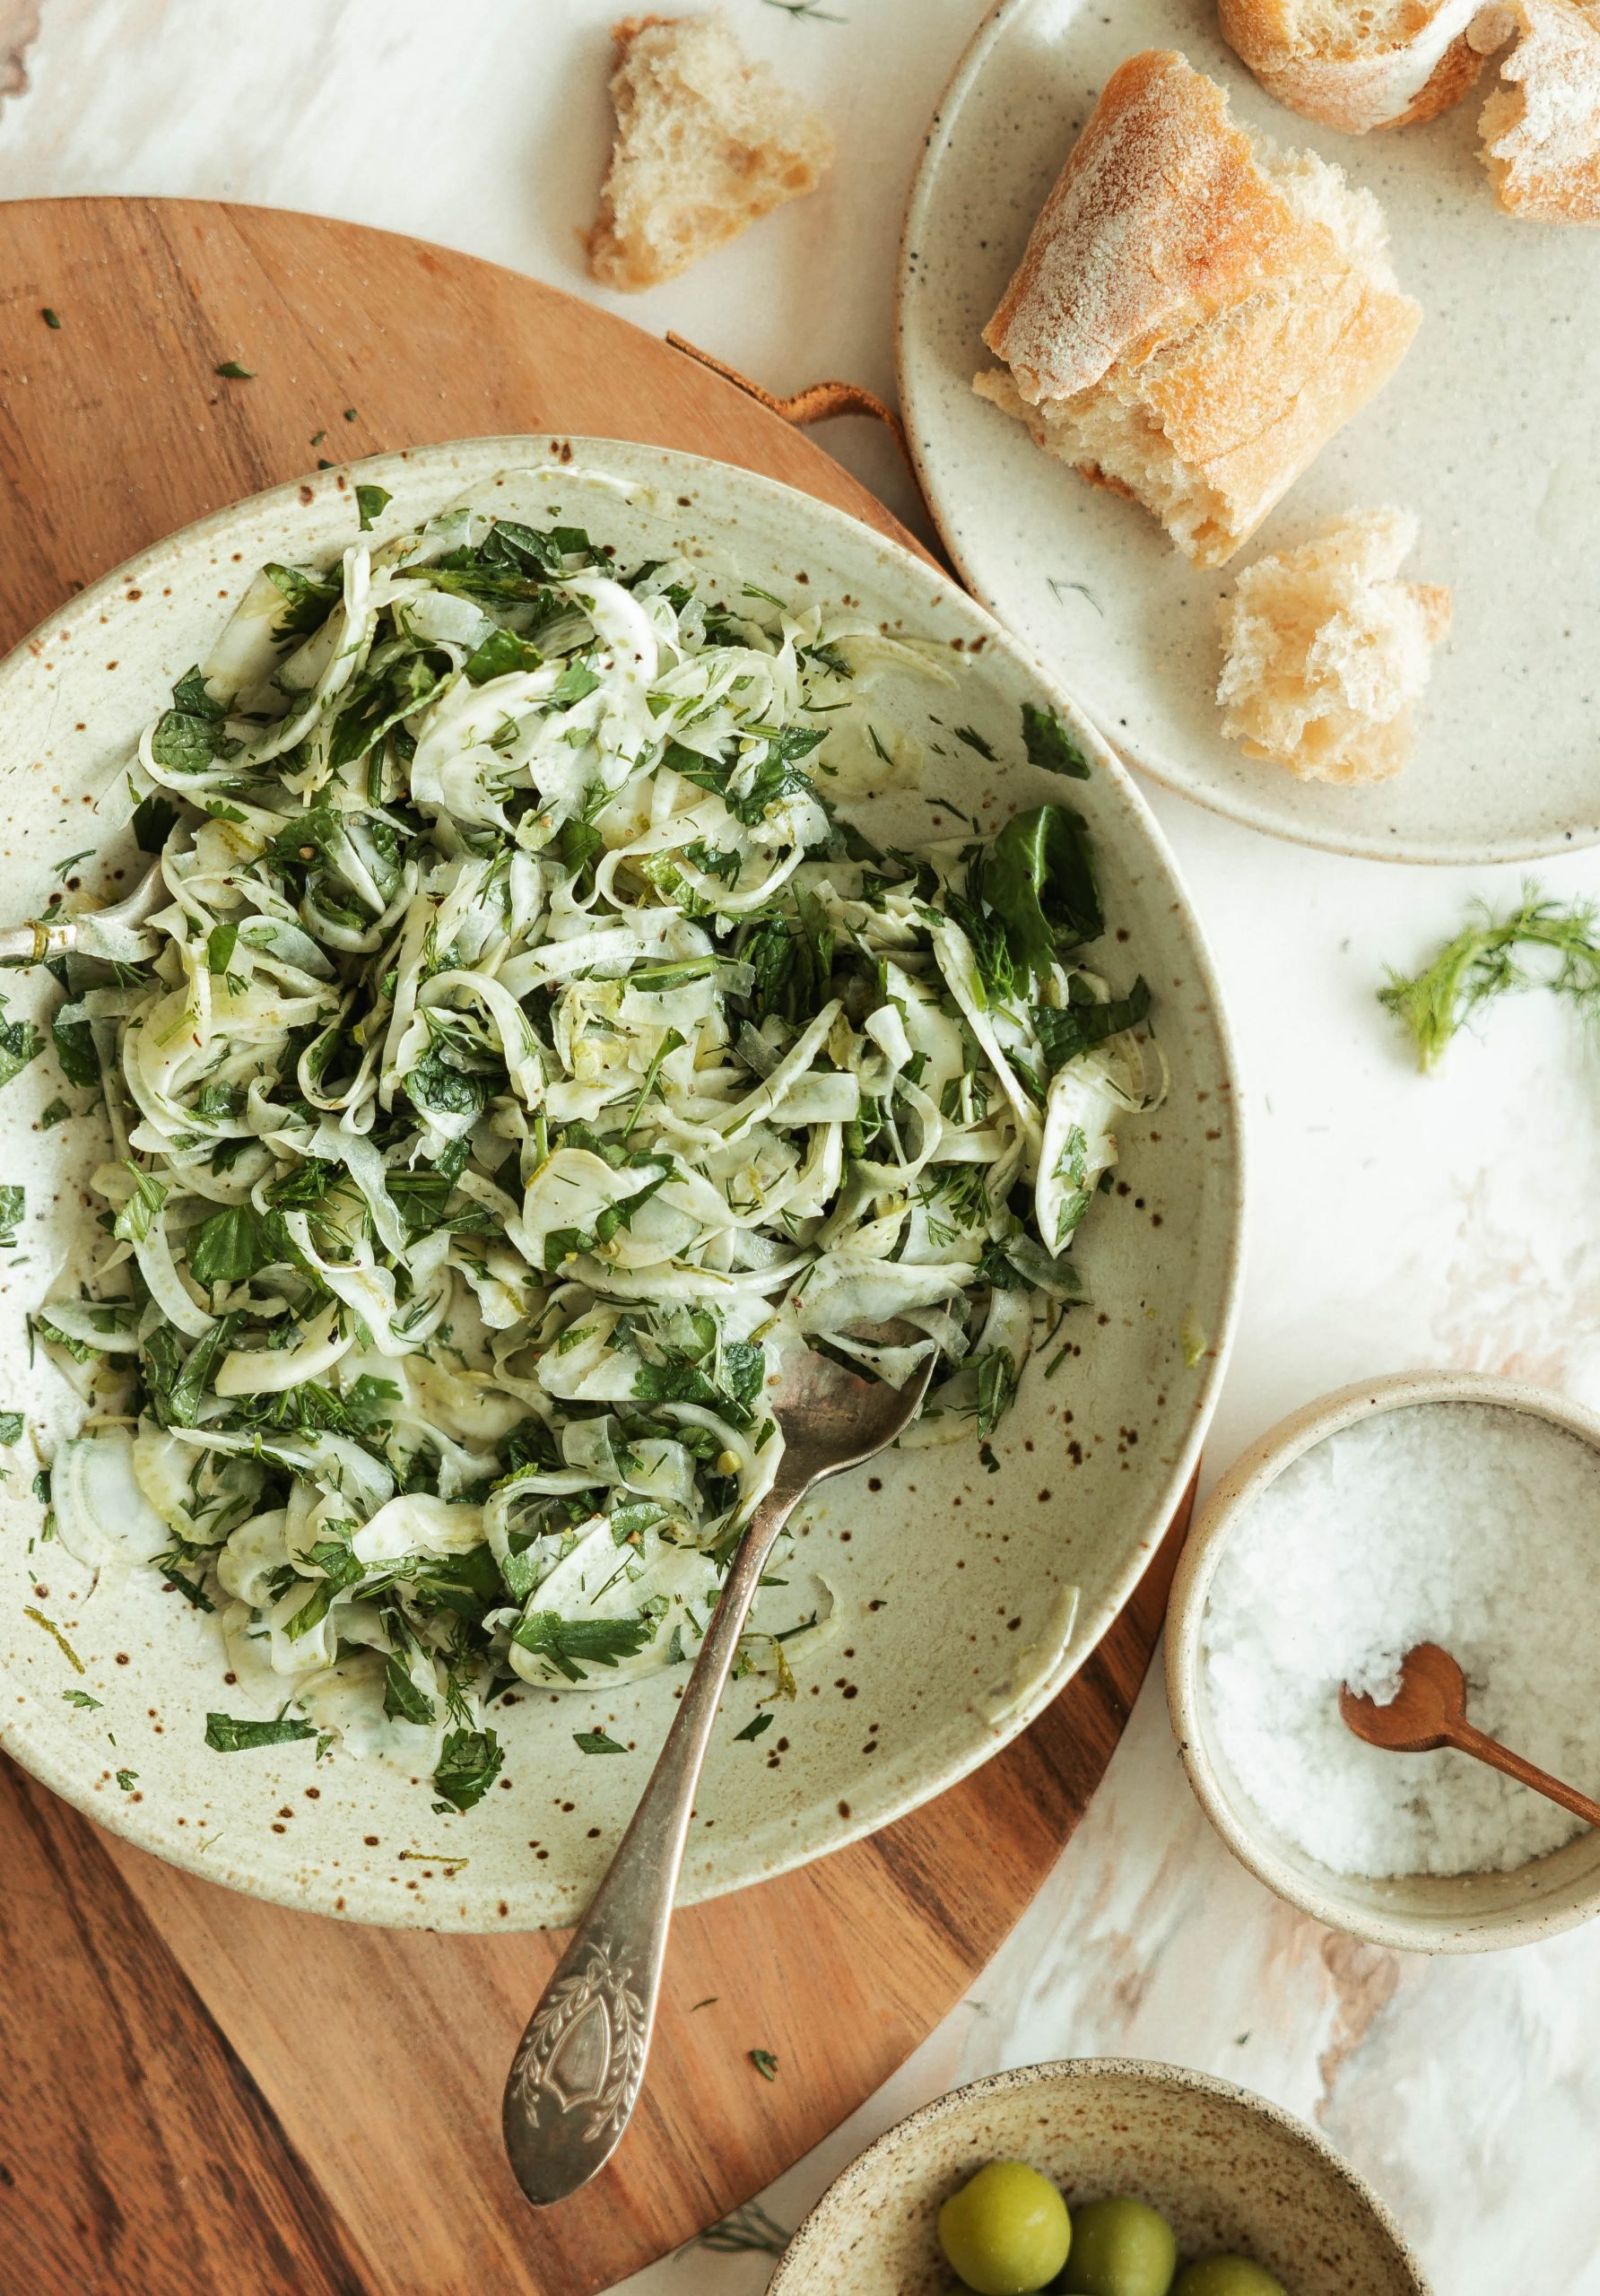 Summery fennel salad with herbs